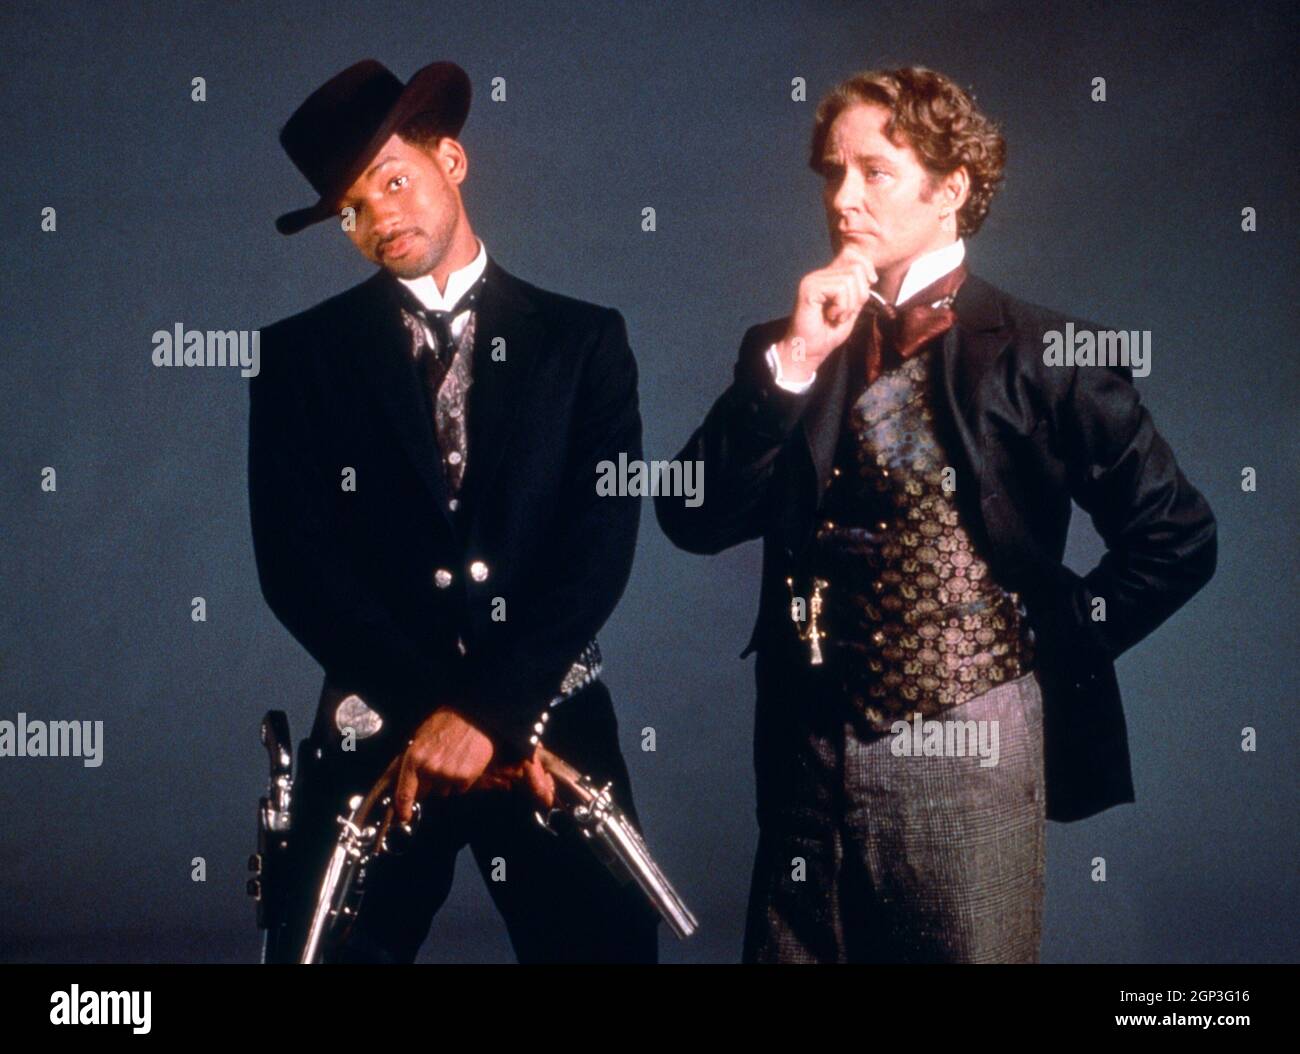 WILD WILD WEST, from left: Will Smith, Kevin Kline, 1999. ph: © Warner  Brothers / courtesy Everett Collection Stock Photo - Alamy